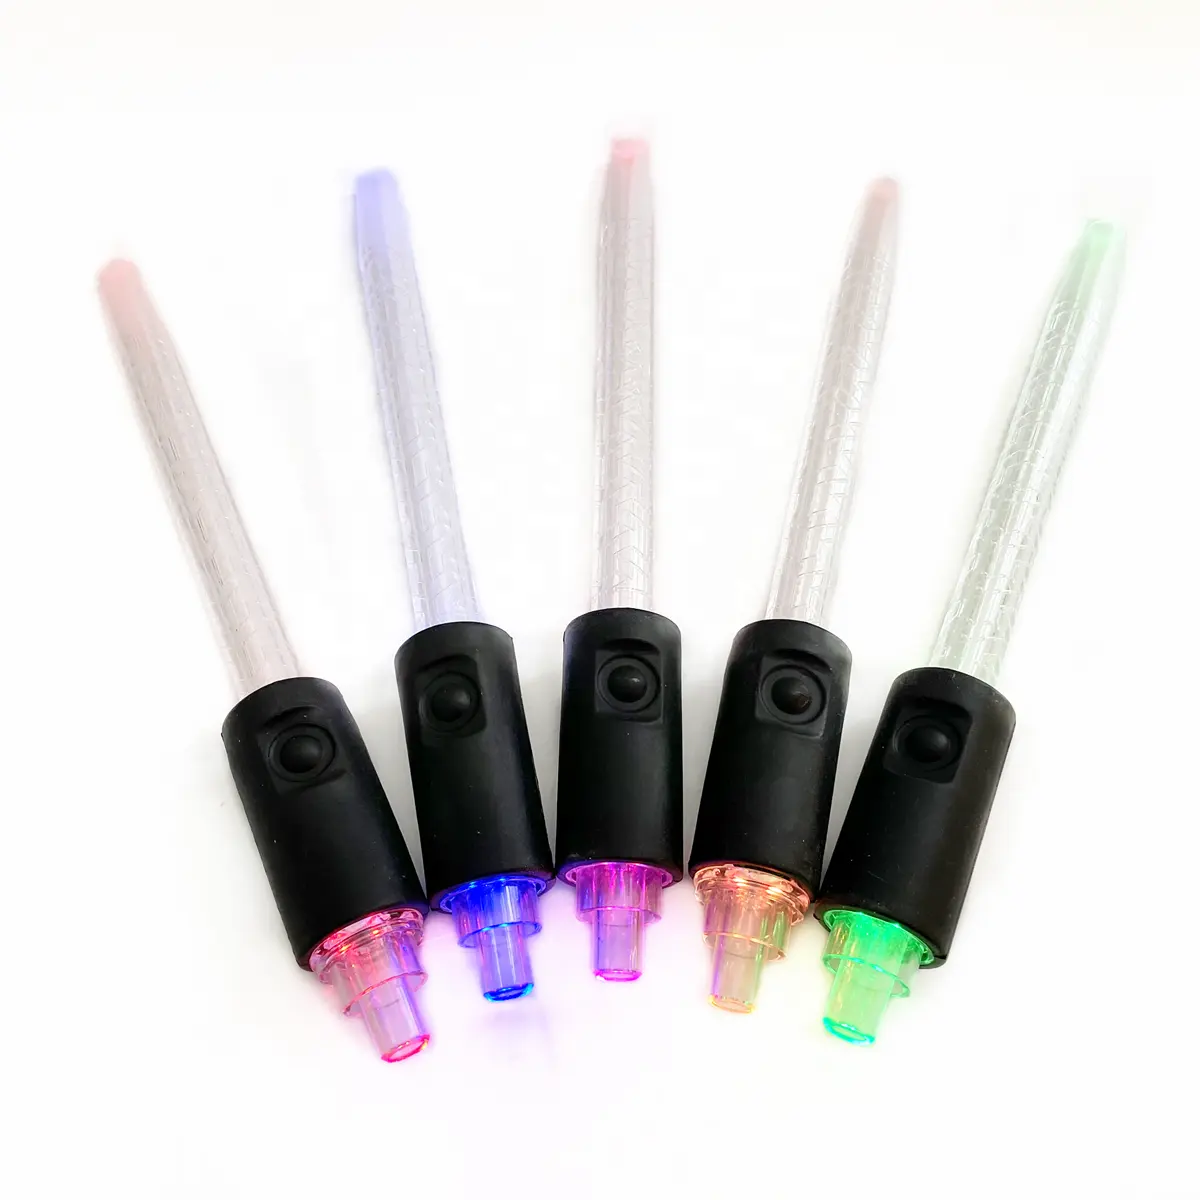 2022New hookah LED acrylic mouthpieces chicha narguile handle shesha hookah mouth tips with led lights accessories